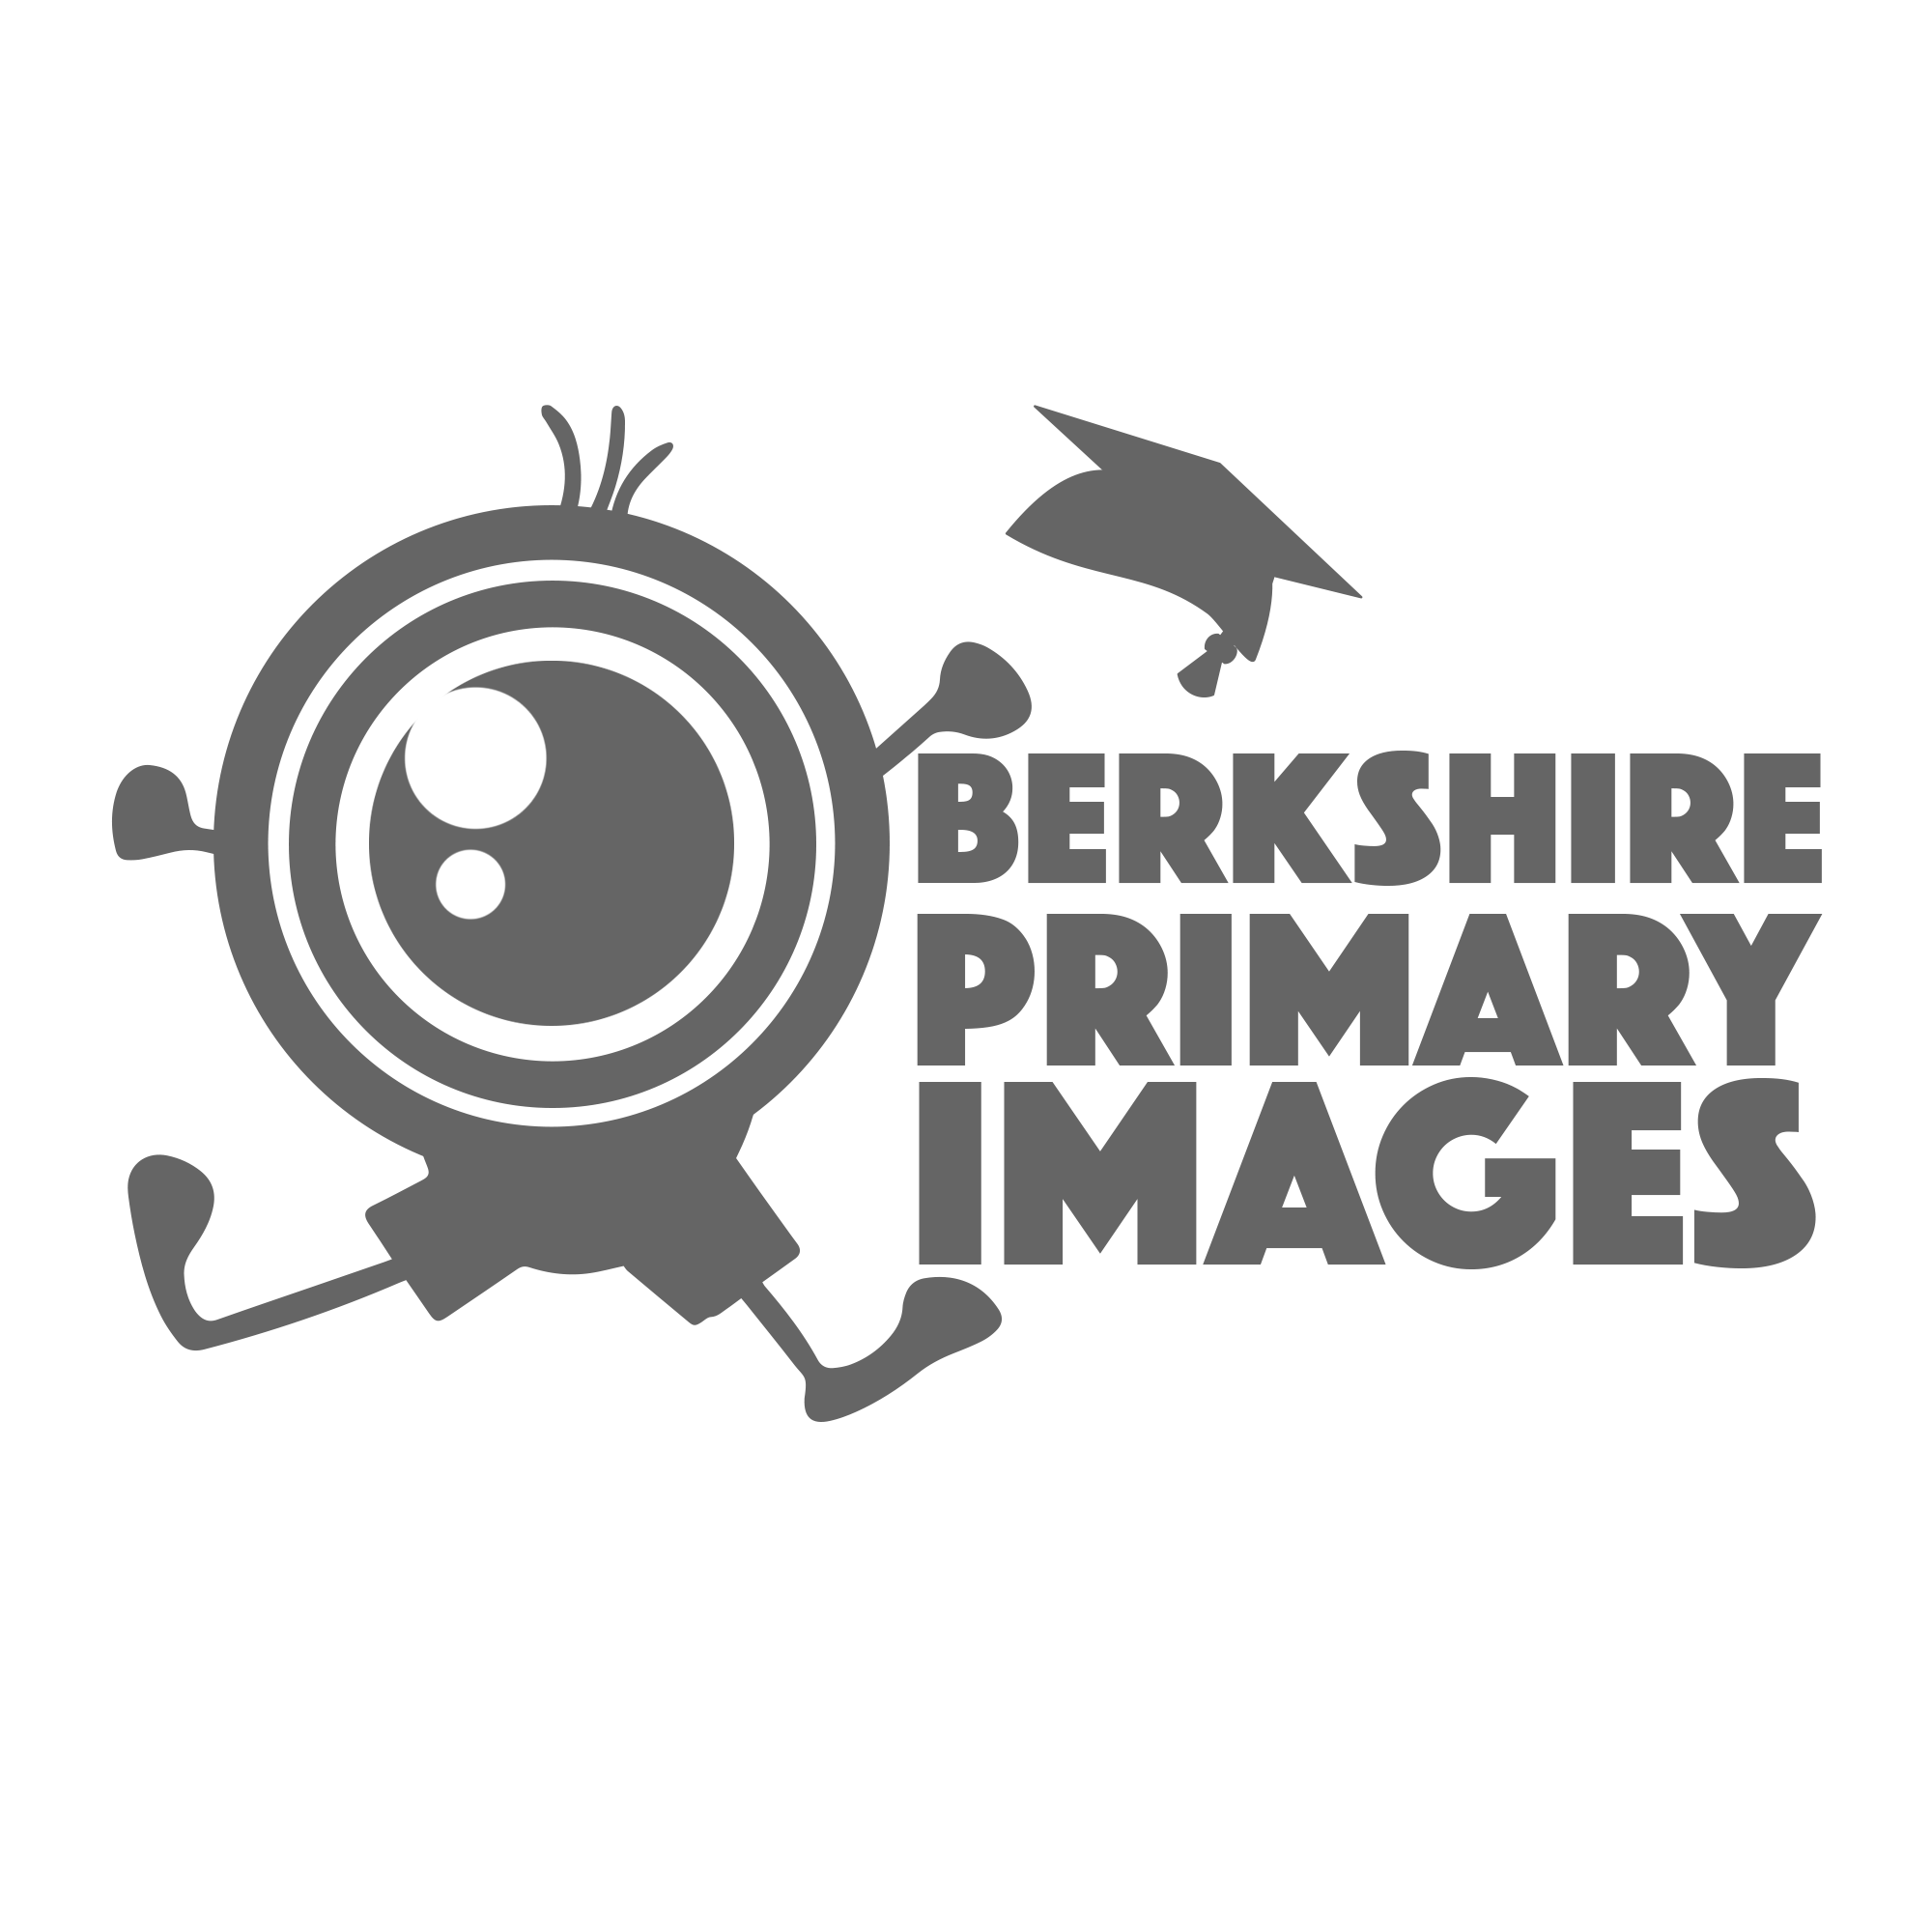 Berkshire Primary Images